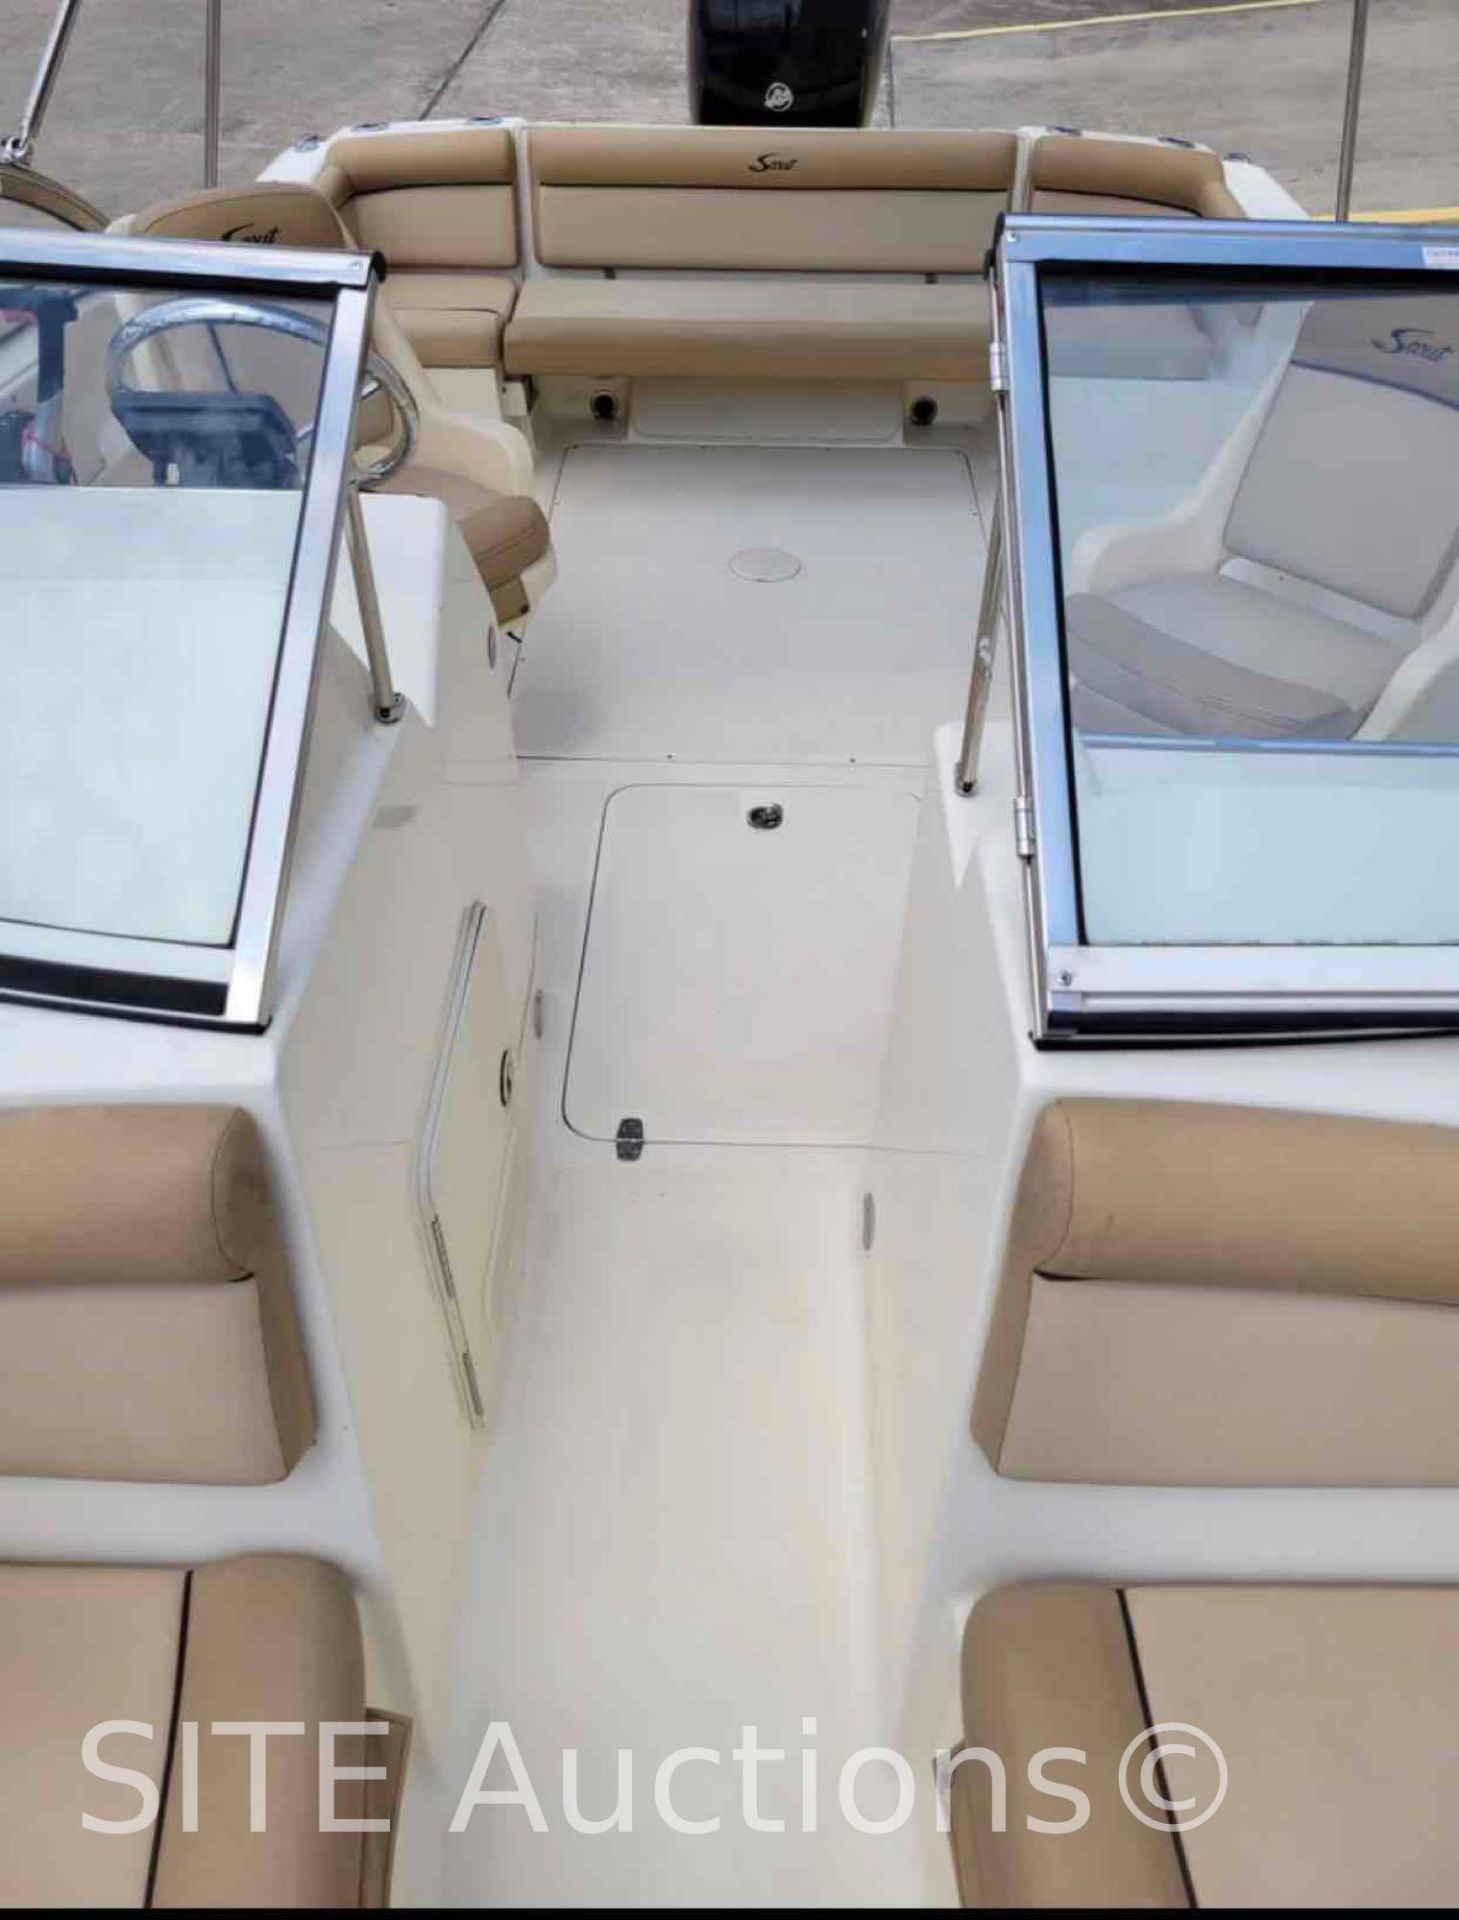 2020 Scout Dorado 20ft. Boat with Trailer - Image 14 of 21